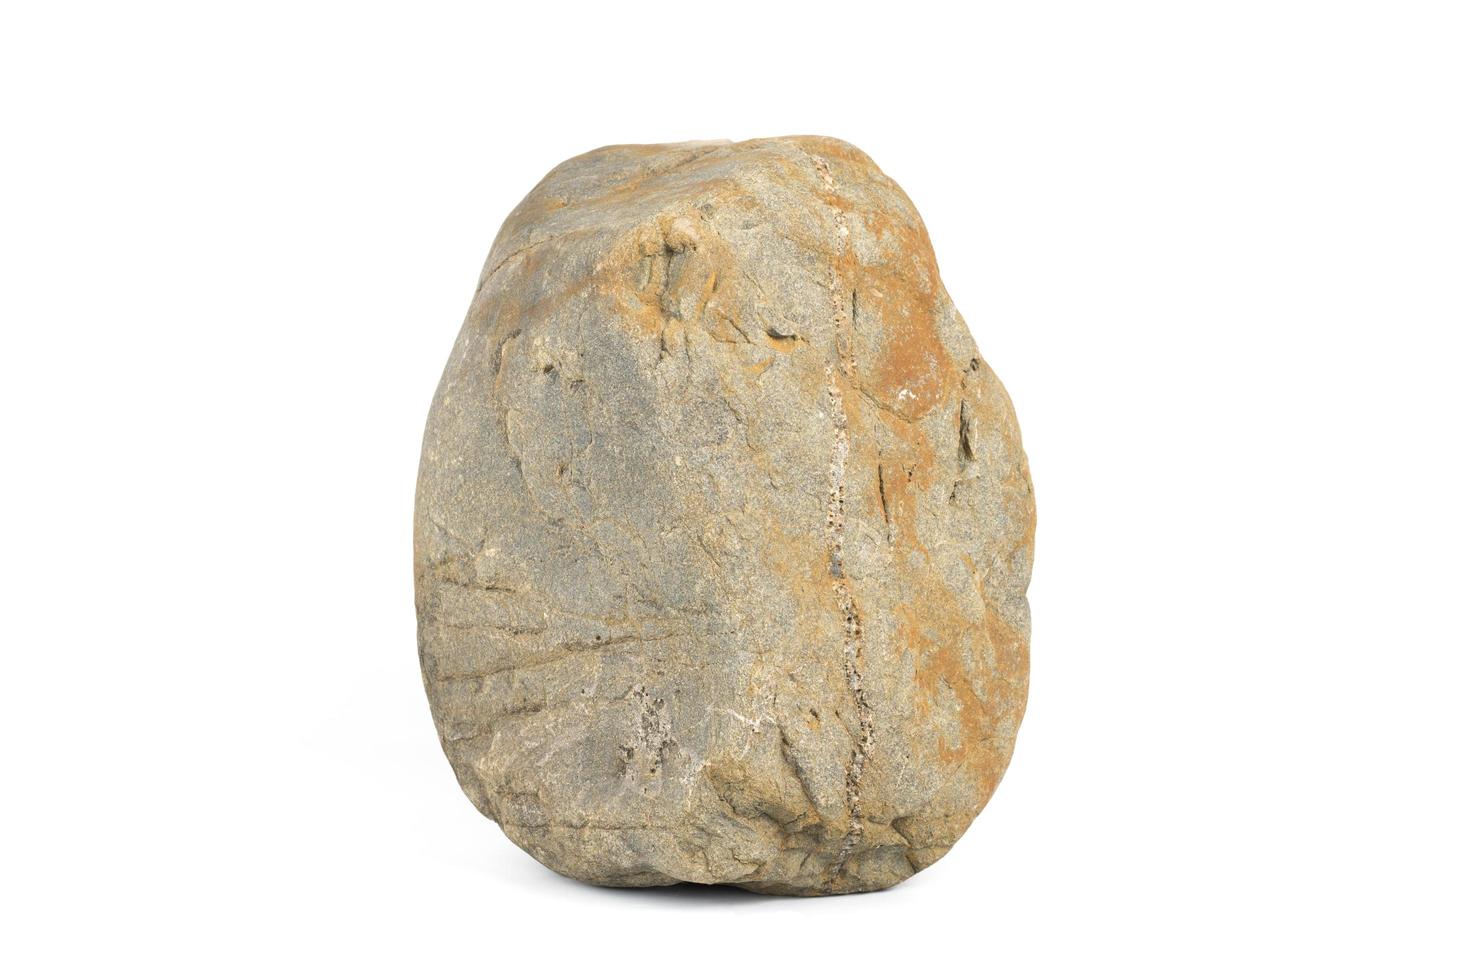 River rock or mountain rock isolated on a white background photo